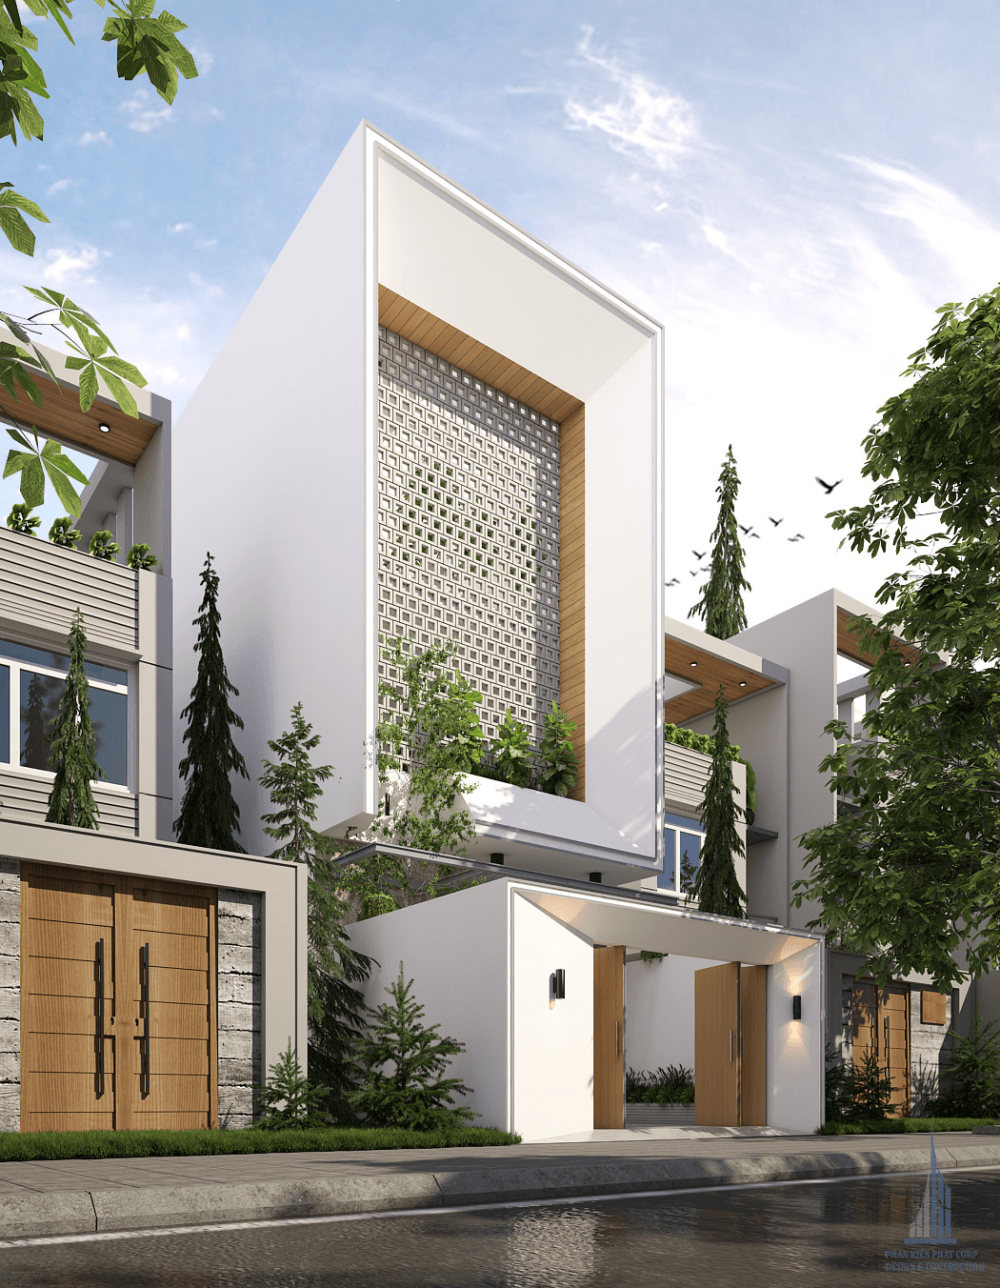 House-on-3-more-beautiful-to-be-with-door-3-cửa-3